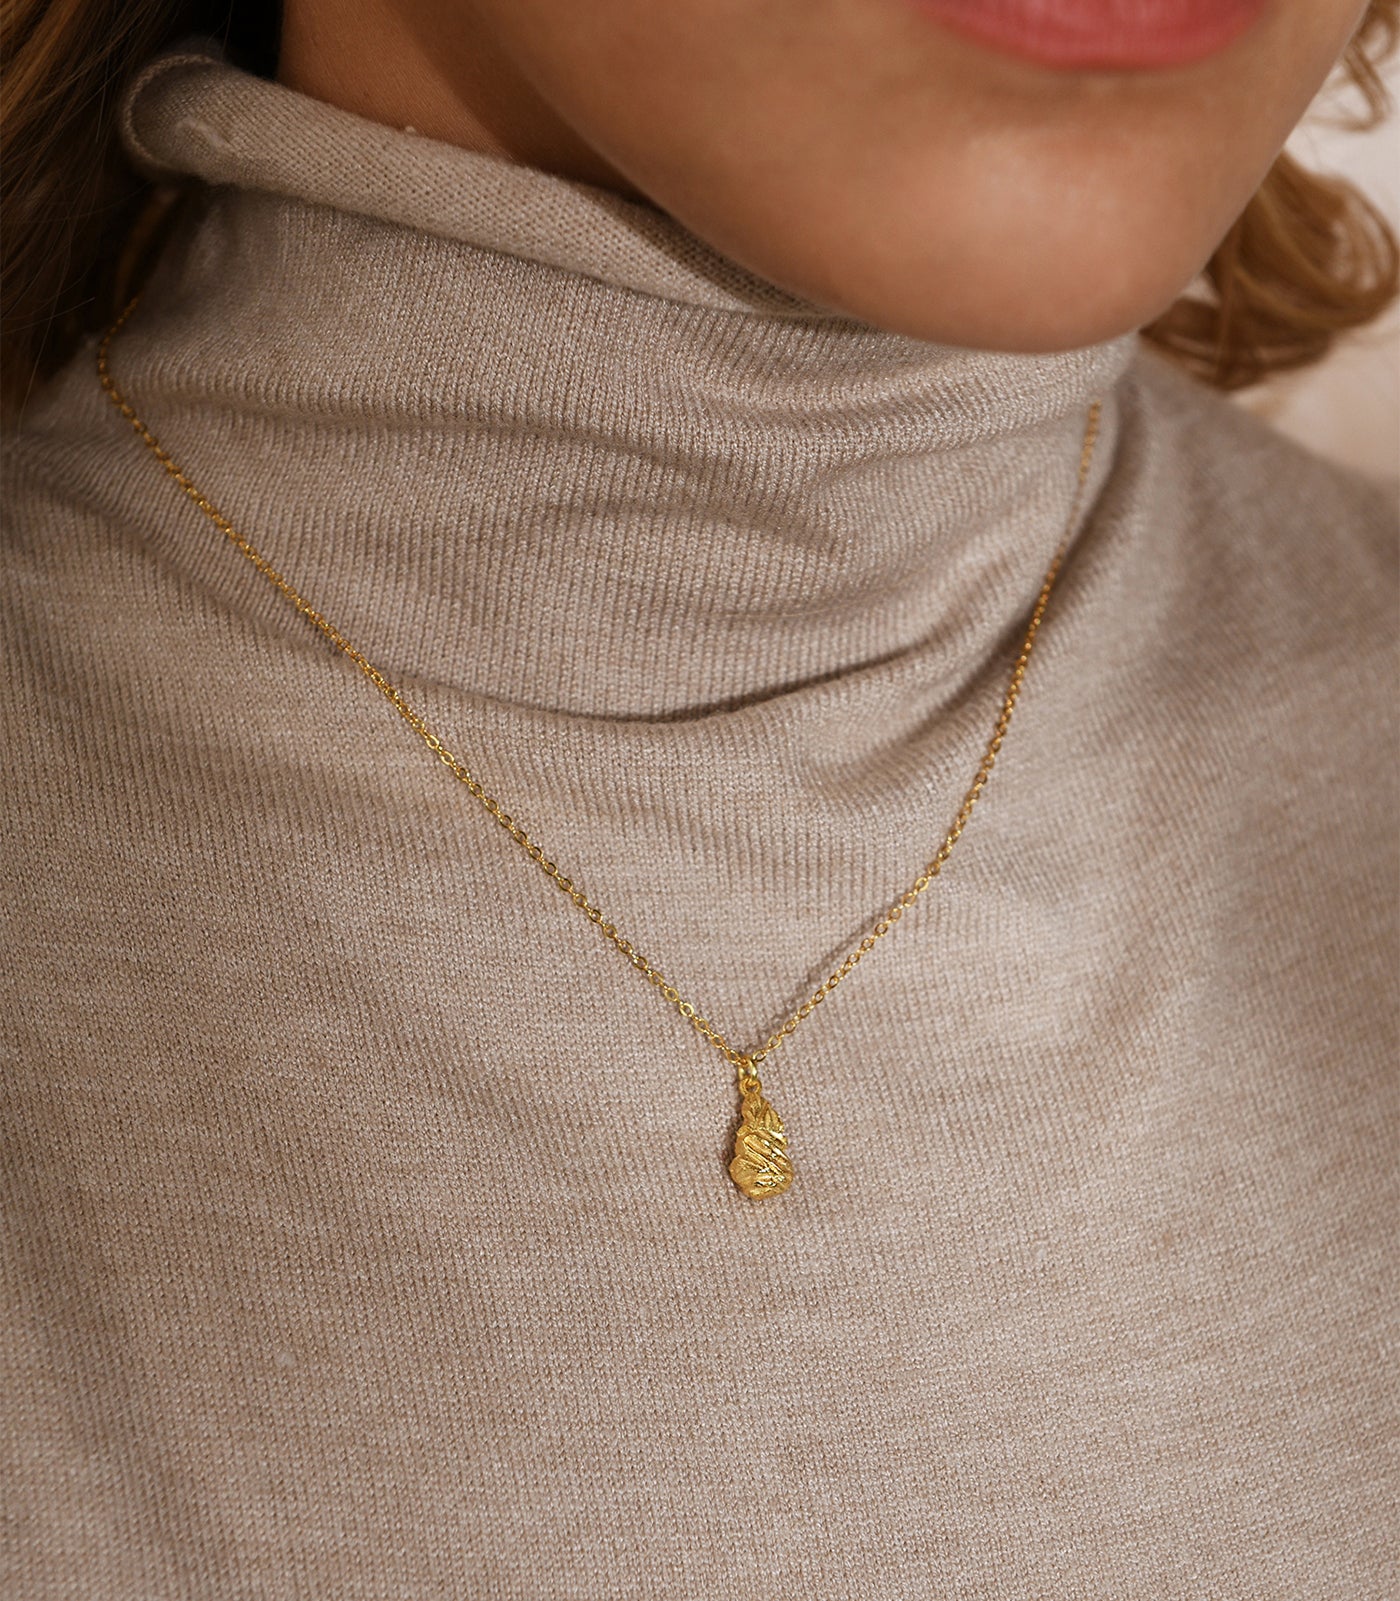 A model wears a gold vermeil necklace with a nugget pendant.